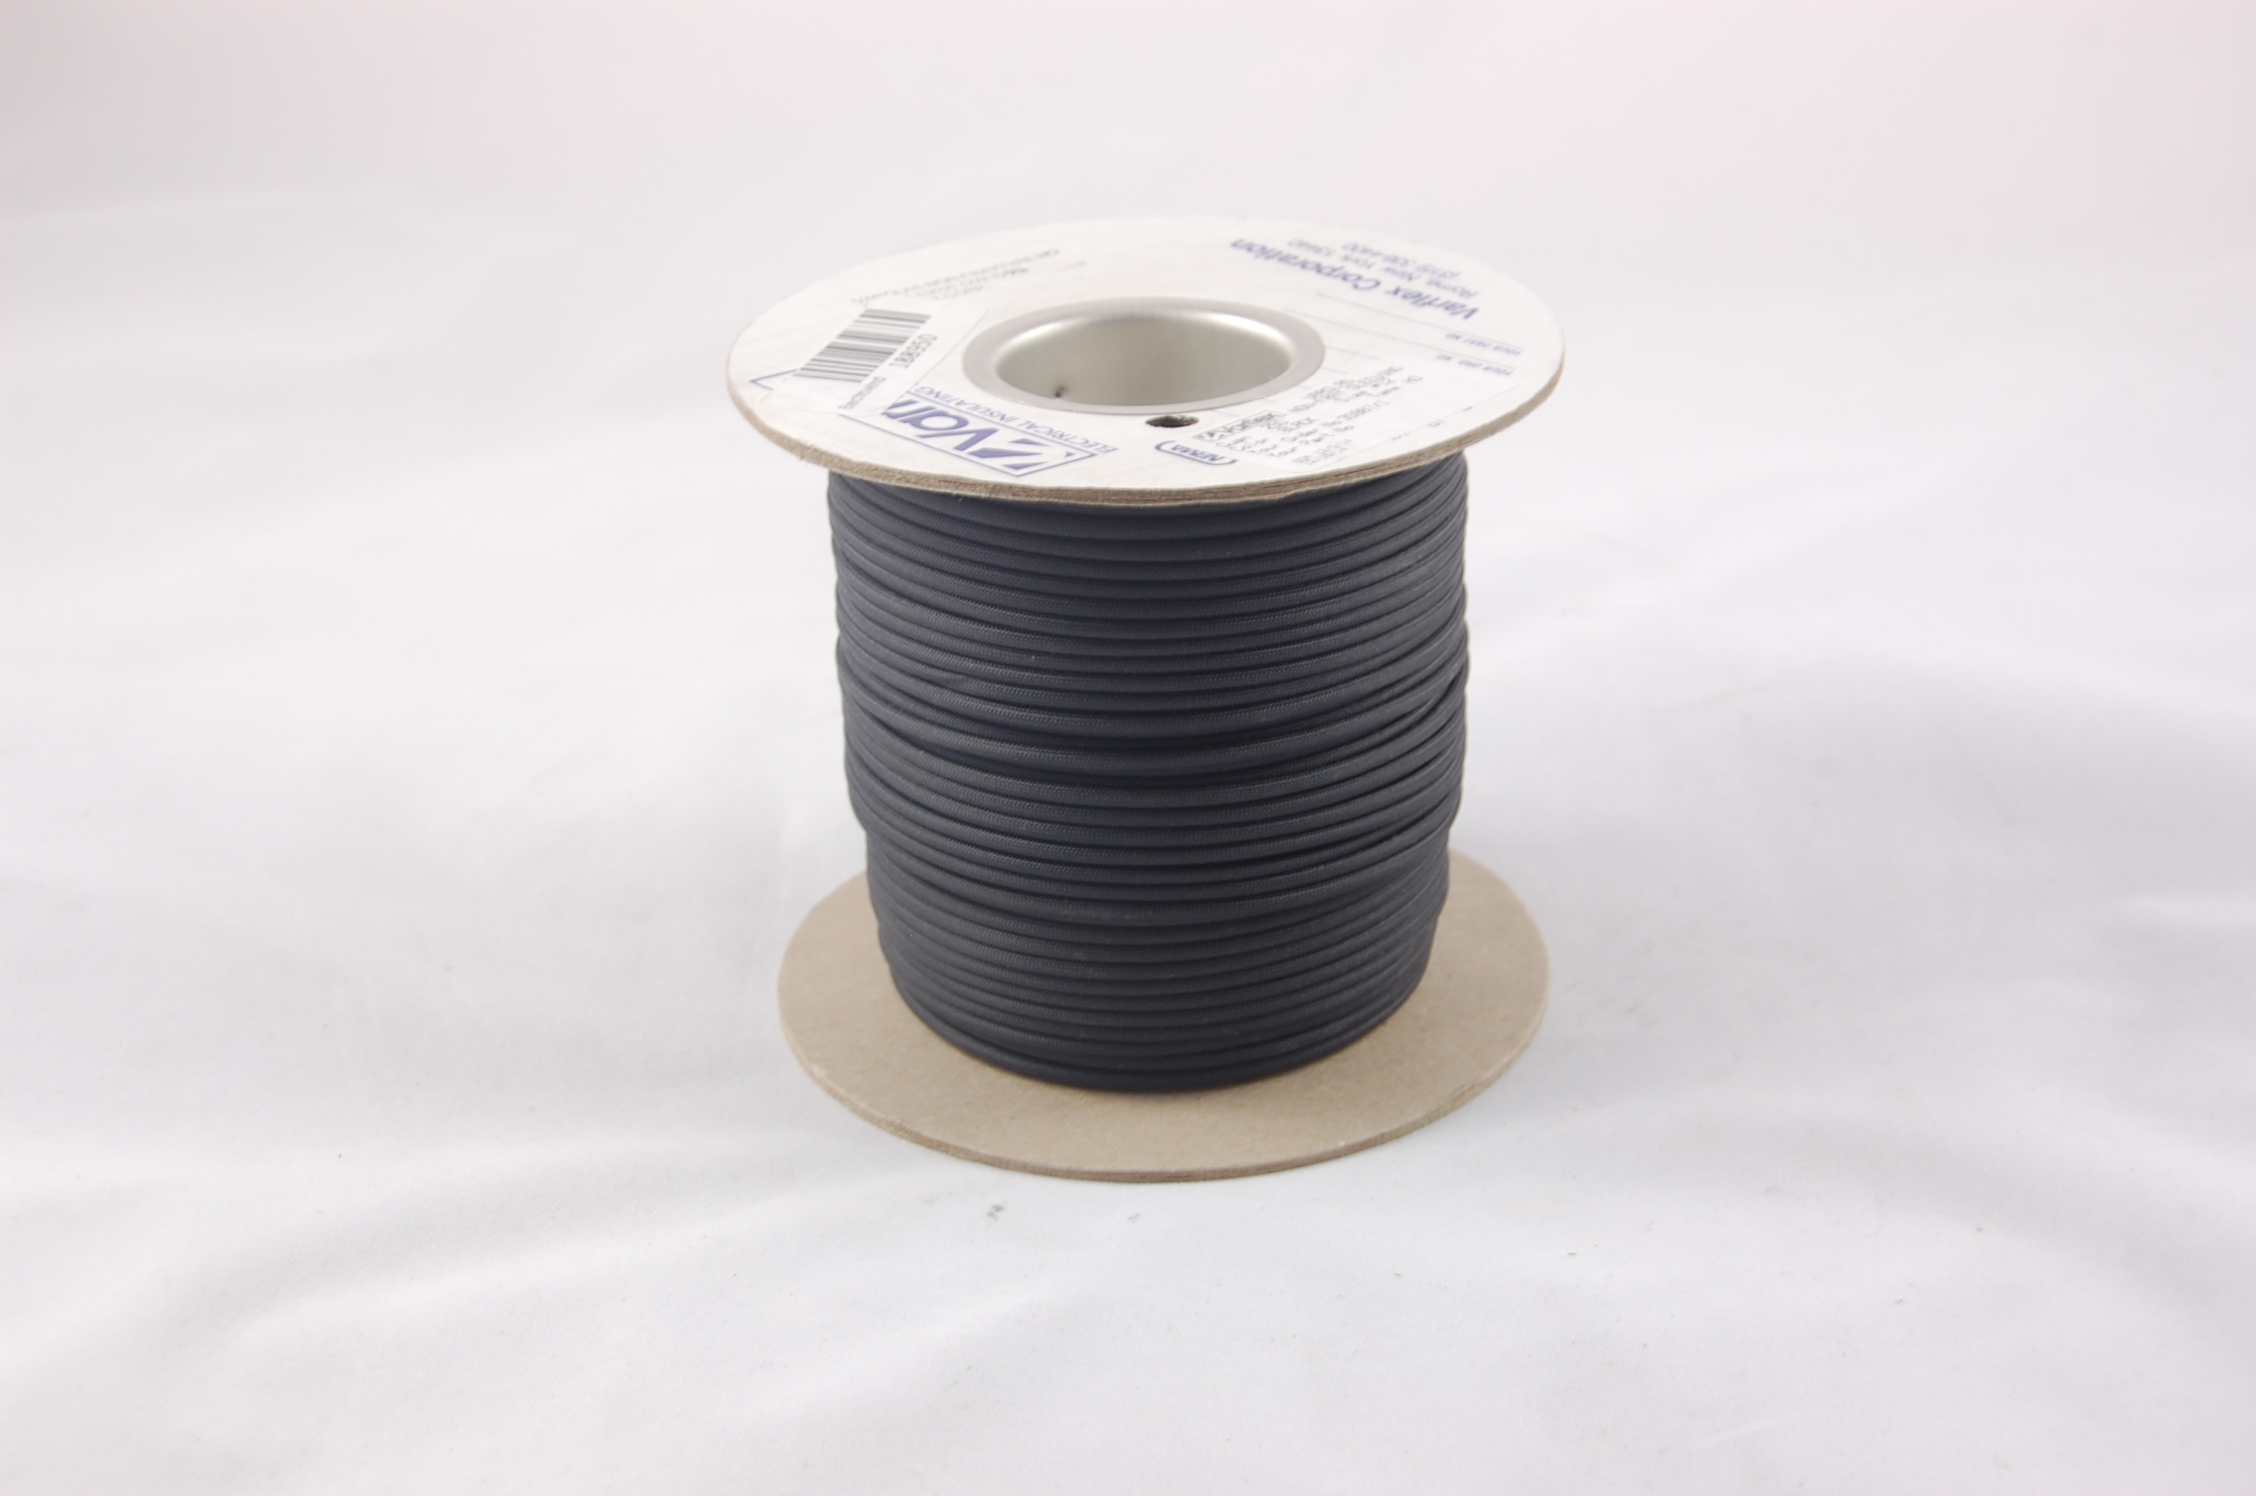 1" AWG Varglas Type HO Heat-Cleaned and Treated High Temperature Non-Fray Flexible Fiberglass Sleeving , black, 100 FT per spool